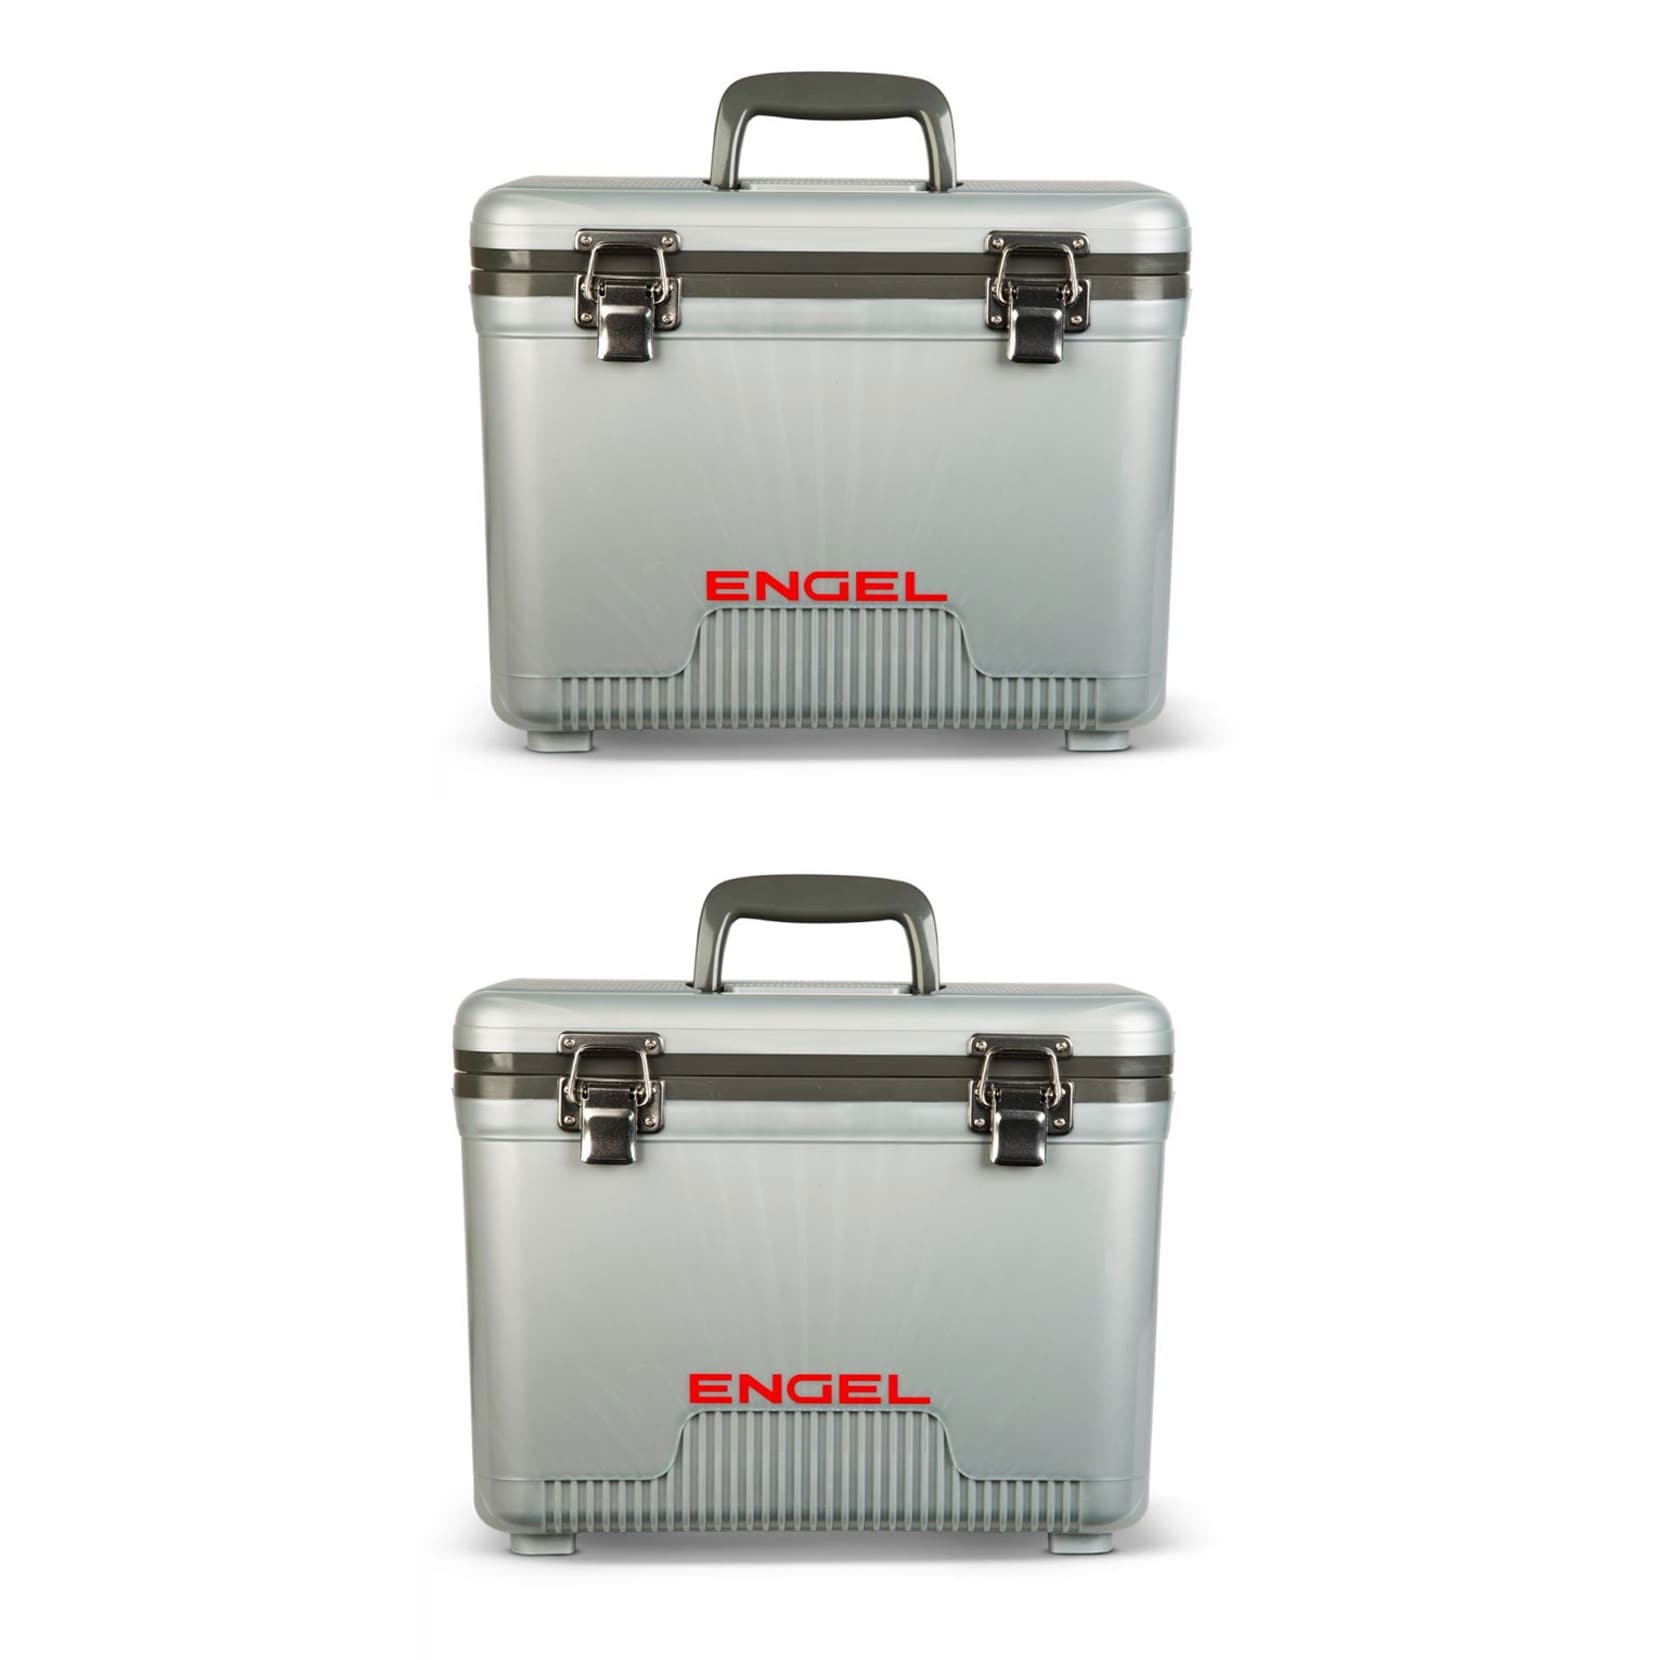 Engel Coolers Engel Silver Insulated Personal Cooler at